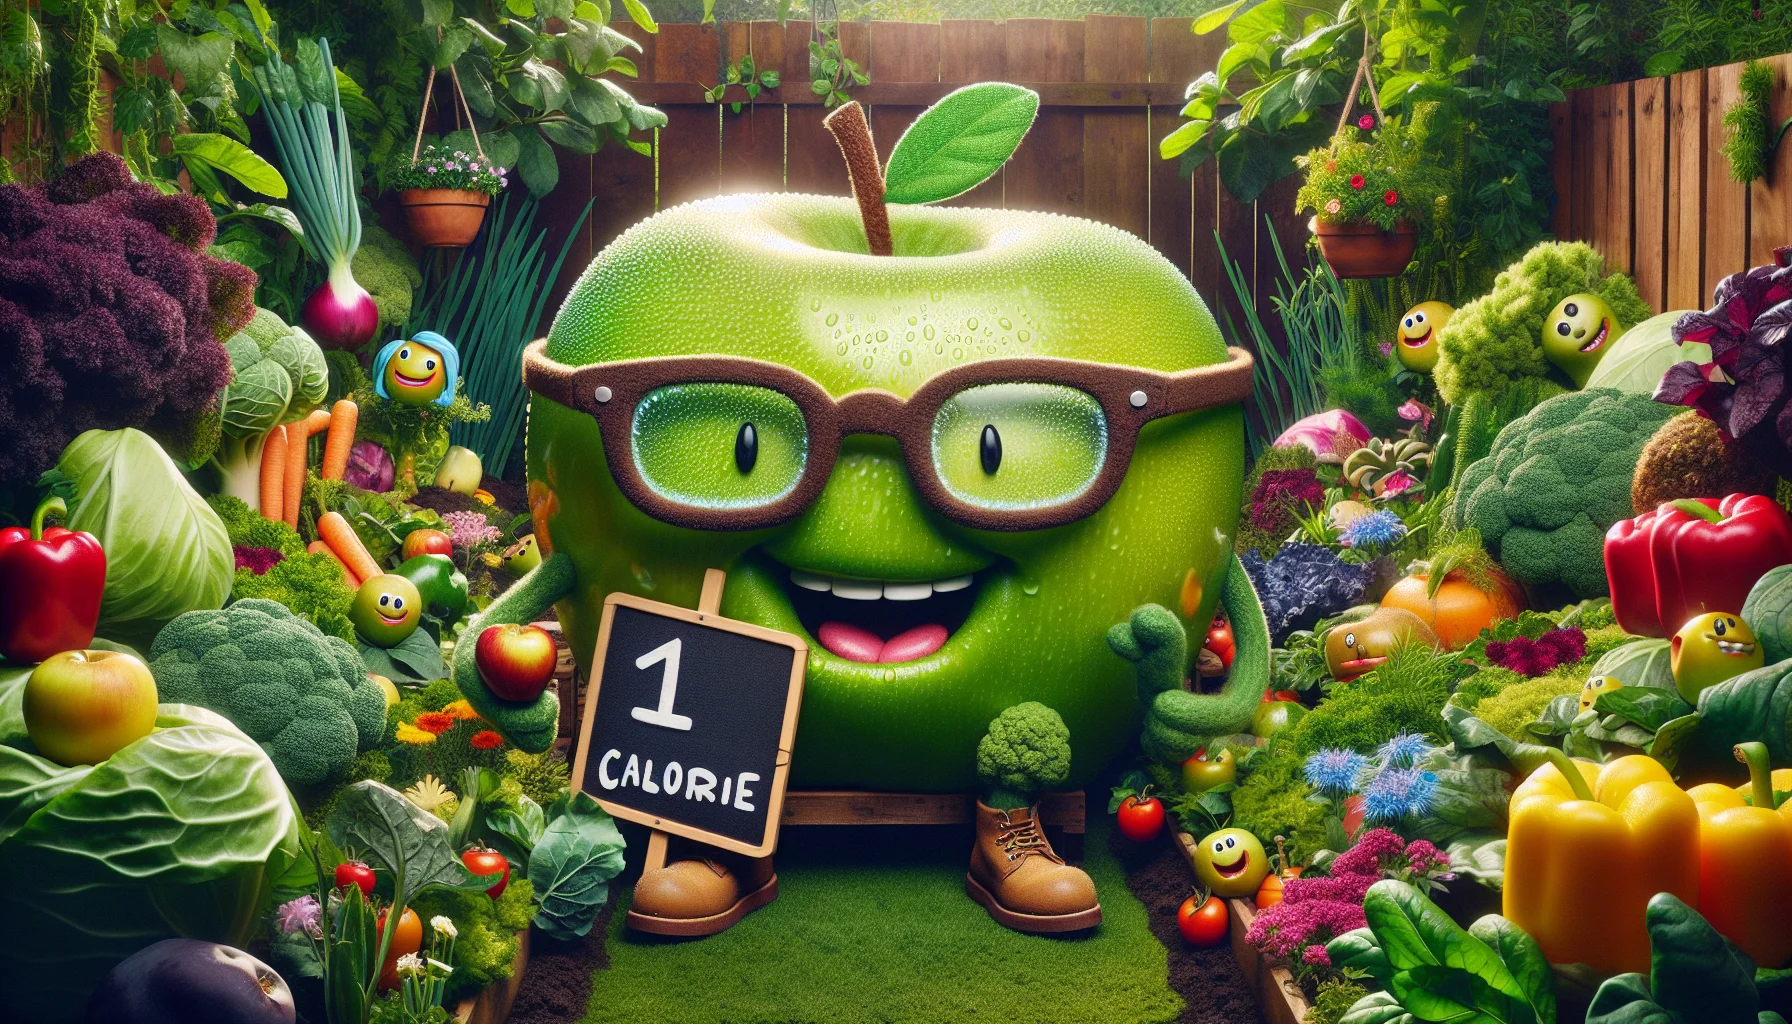 Create a playful and humorous scene set in a bountiful garden. In the center, a large, juicy green apple takes center stage. It is wearing an oversized pair of glasses and it holds a big sign with '1 calorie' written on it in bold, colorful letters. The apple is surrounded by an audience of other fruits and vegetables, all smiling and laughing at the apple's antics, creating a sense of camaraderie and community. Thick foliage, dew-kissed leaves, rich soil, and vibrant plants and flowers in various stages of growth convey the beauty and gratification that come with gardening. The scene imbues the joy of gardening while also humorously promoting the health benefits of eating fresh produce, particularly the low-calorie green apple.